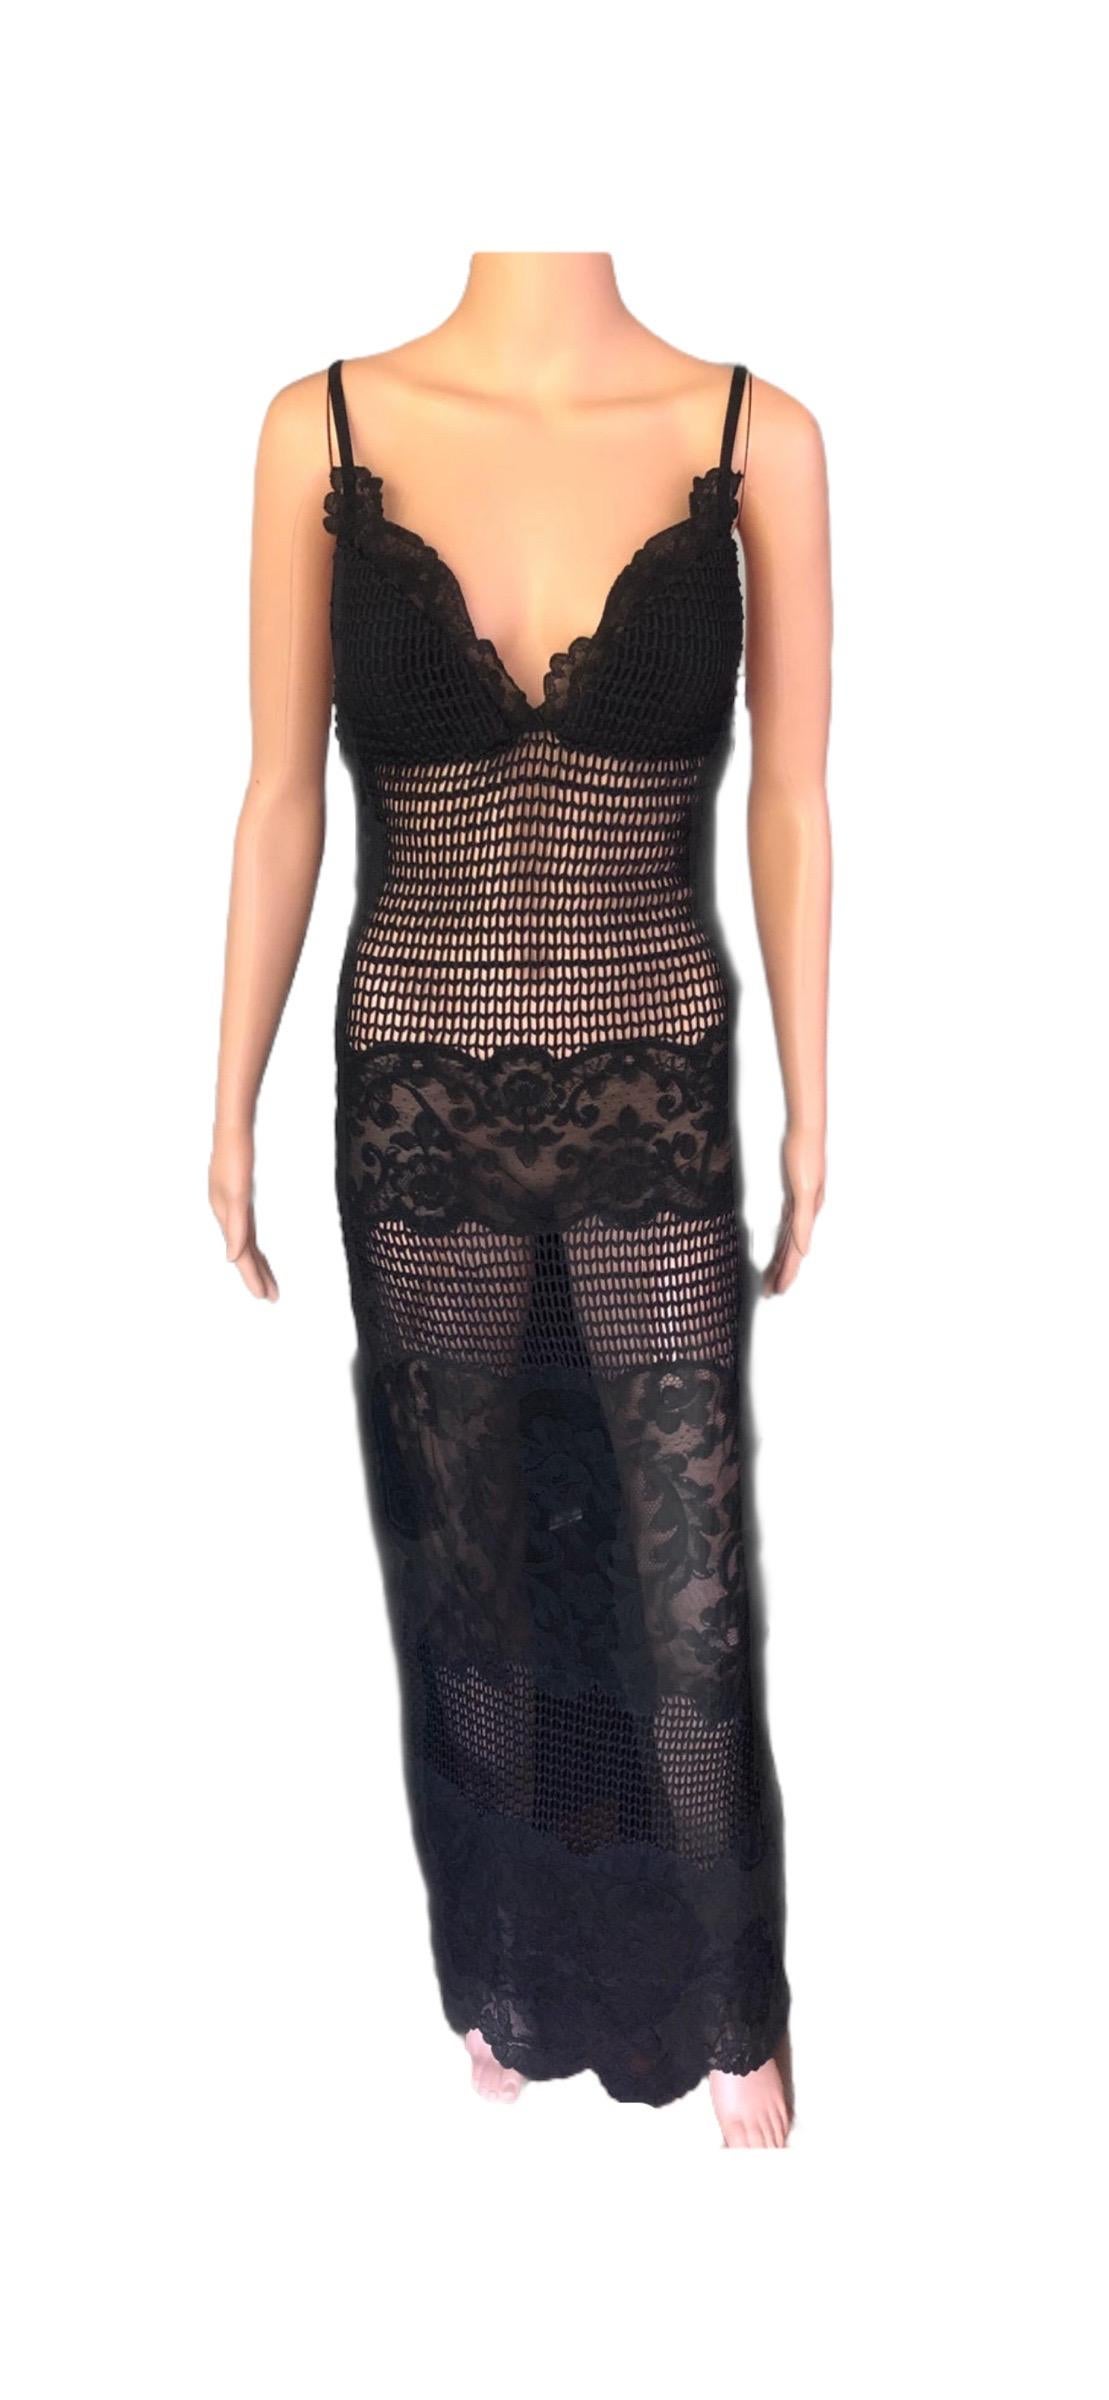 Gianni Versace F/W 1993 Runway Couture Sheer Knit Mesh Lace Evening Dress Gown For Sale 6